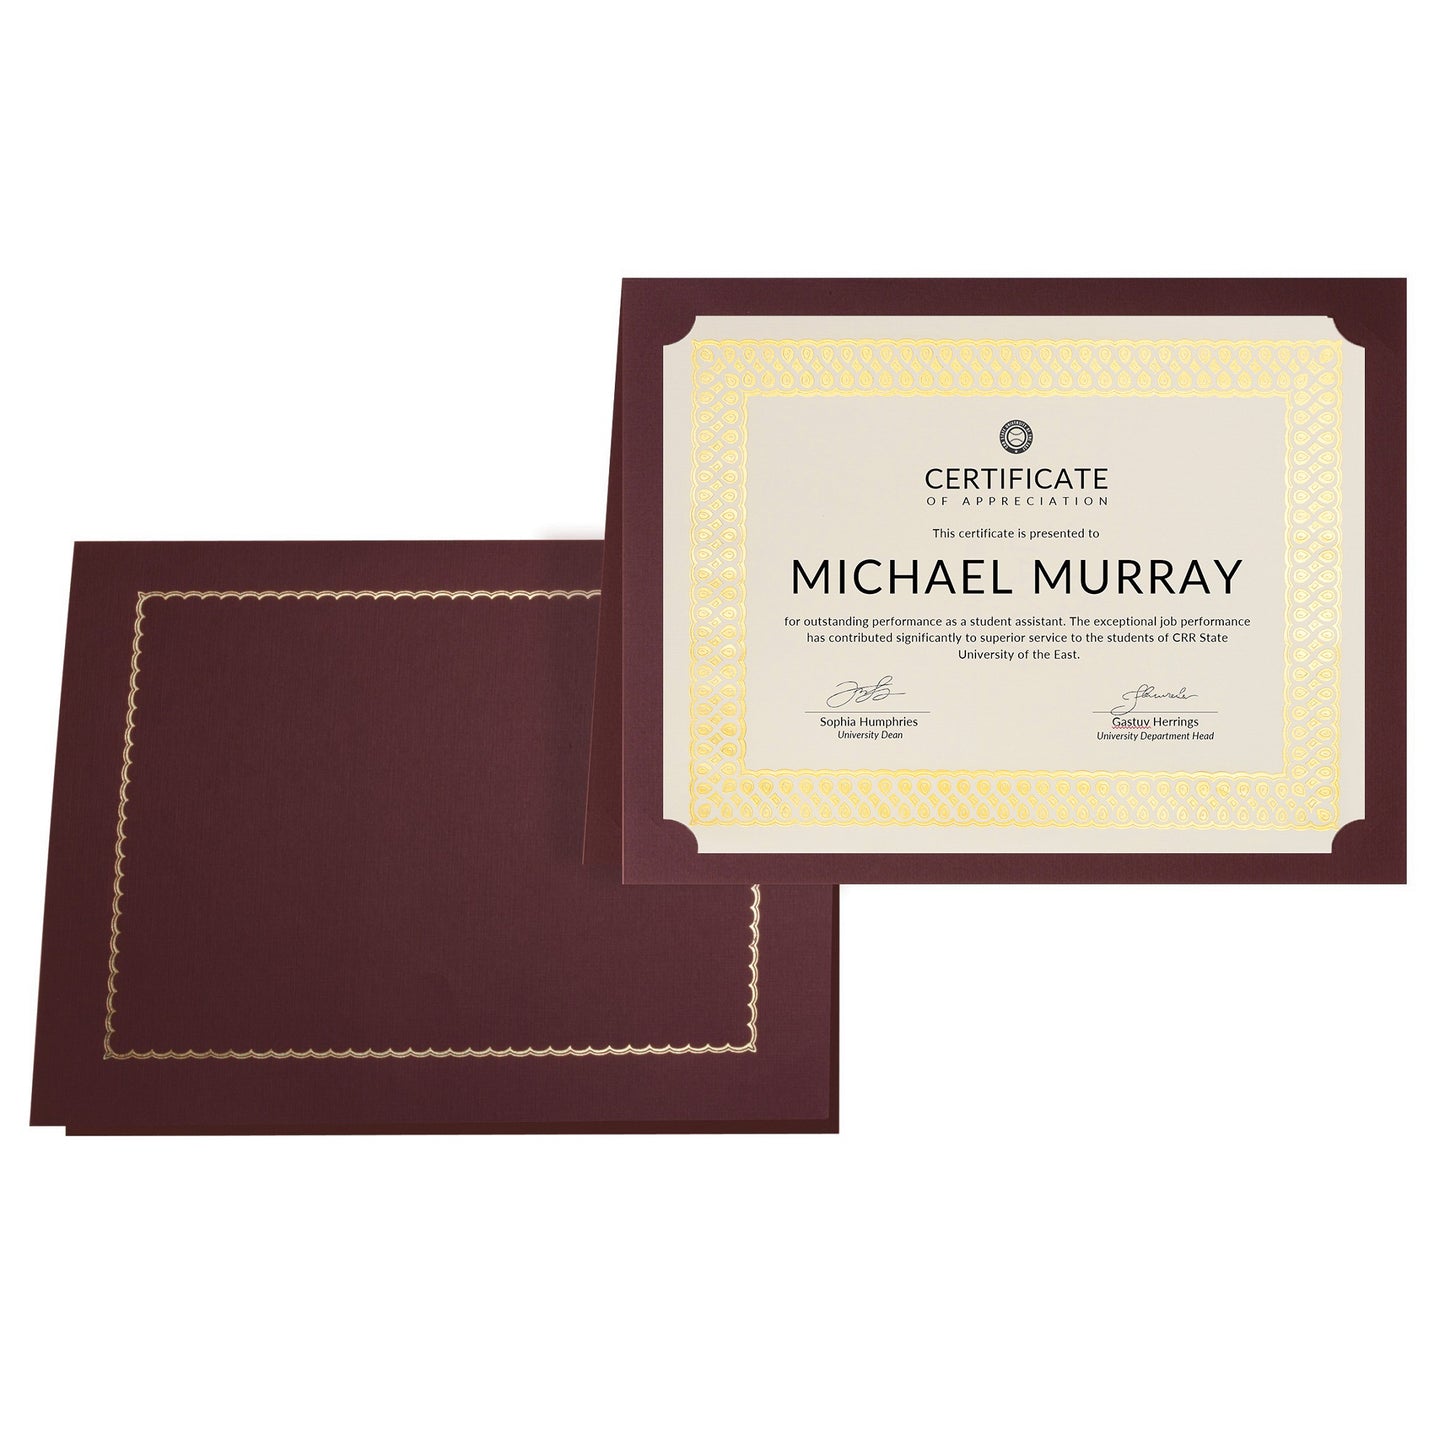 St. James® Classic Linen Certificate Holders with Gold Foil, Burgundy, Pack of 5